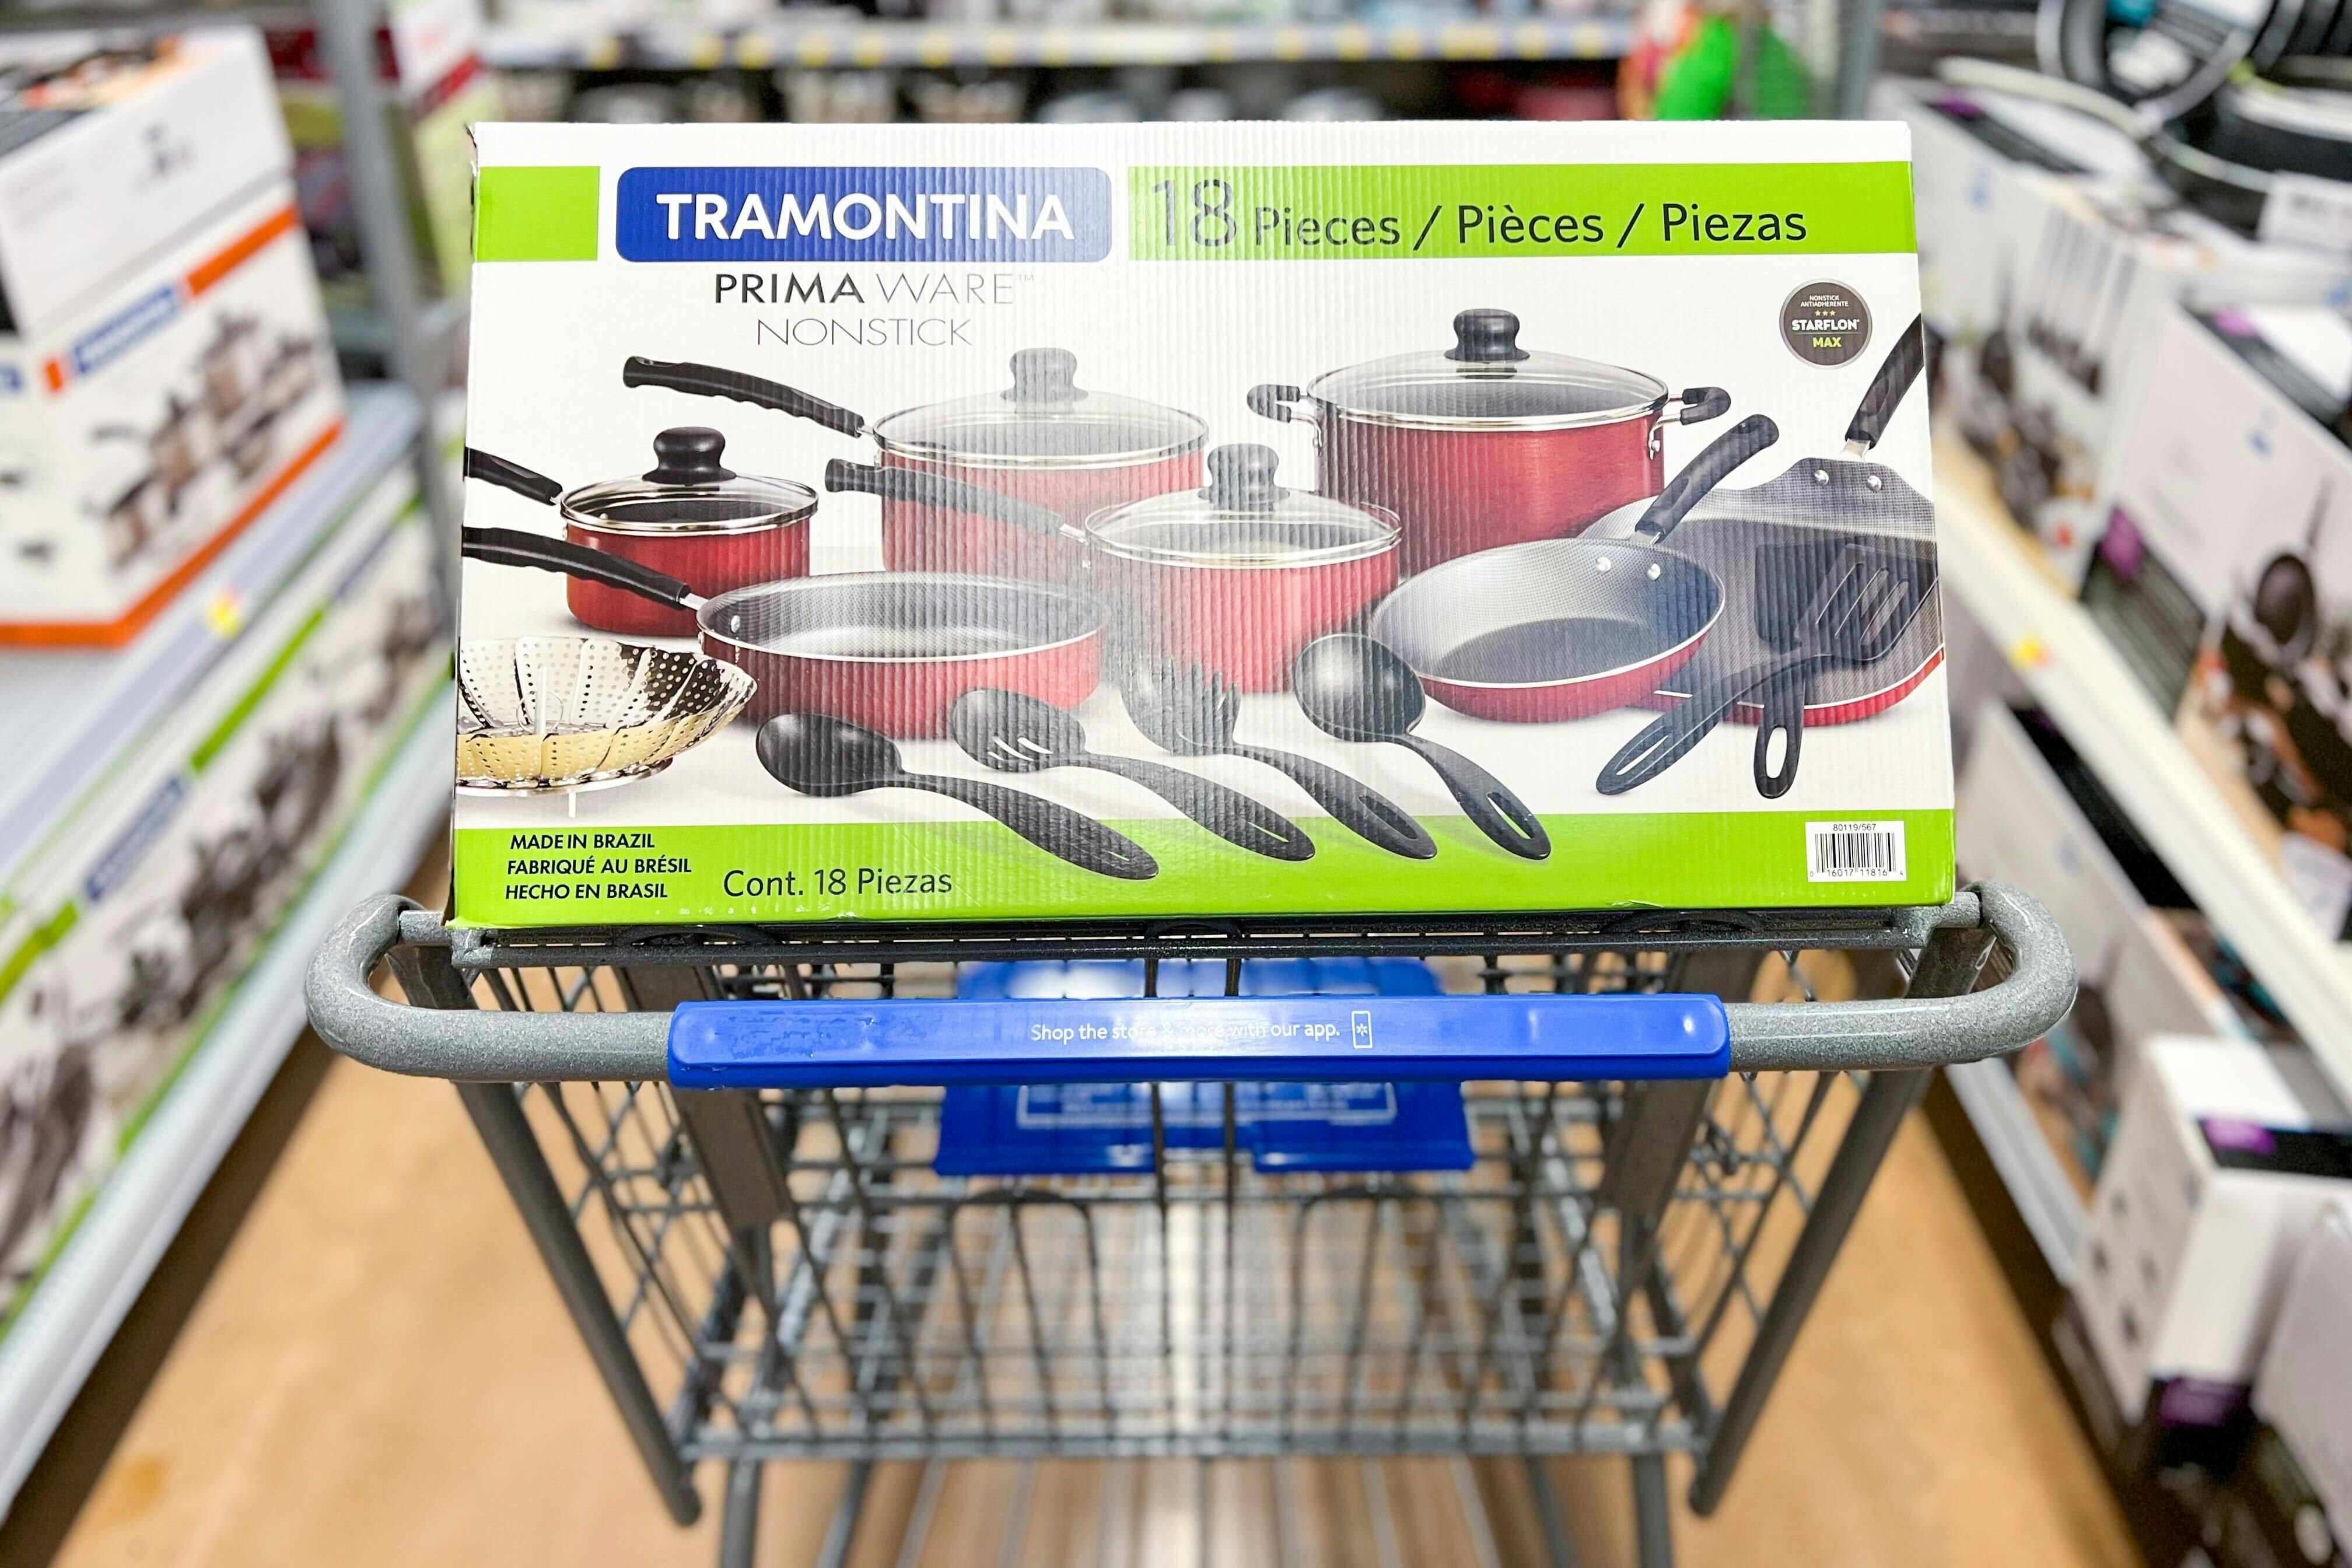 The GreenLife 18-Piece Nonstick cookware set is on sale at Walmart